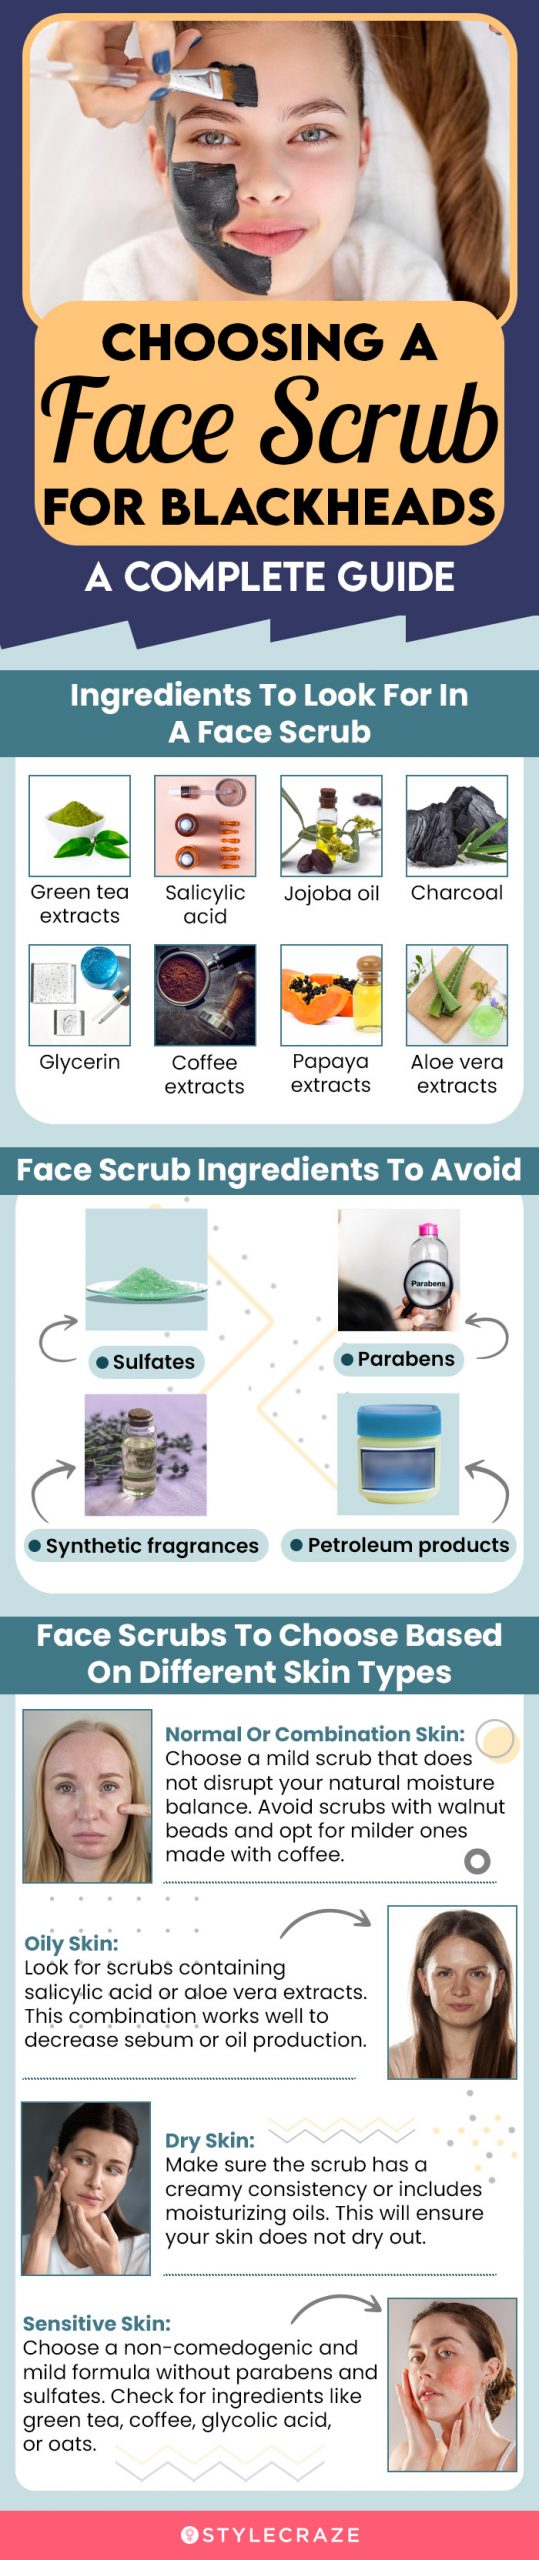 Choosing A Face Scrub For Blackheads: A Complete Guide [infographic]